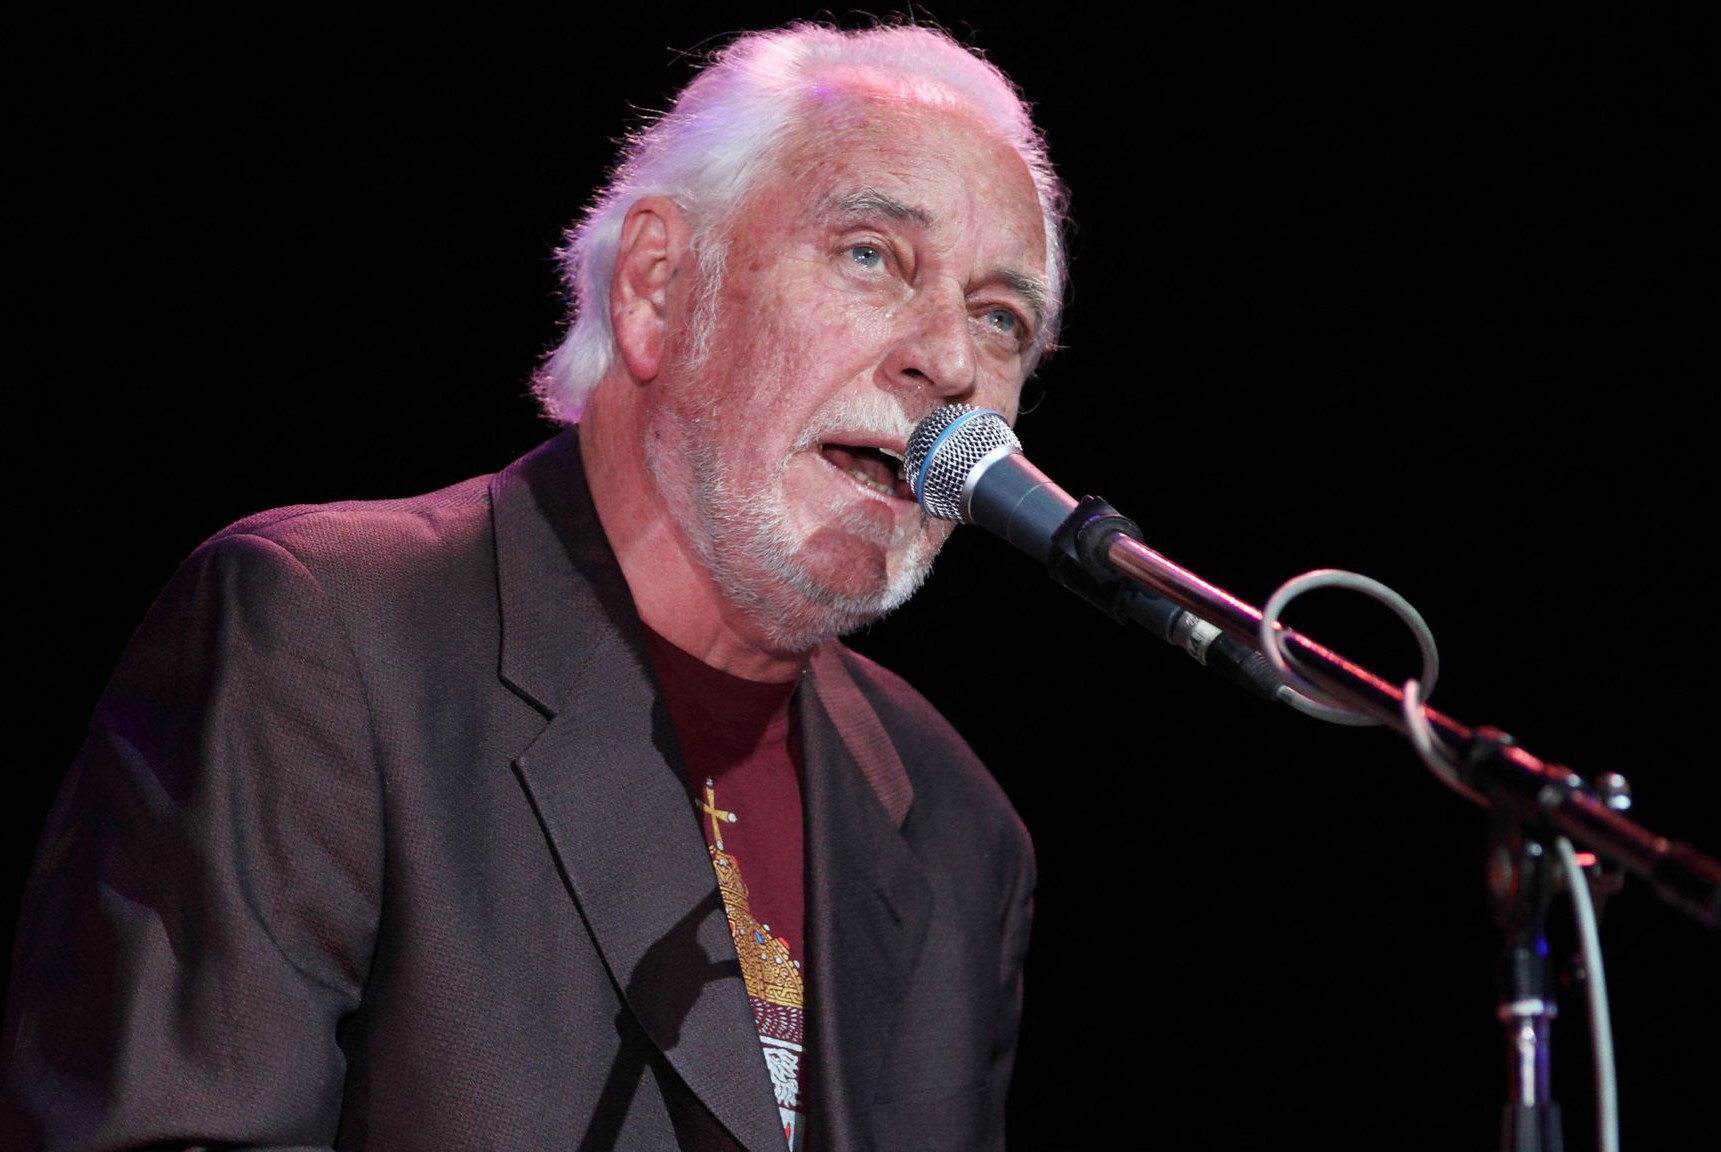 23-mind-blowing-facts-about-gary-brooker